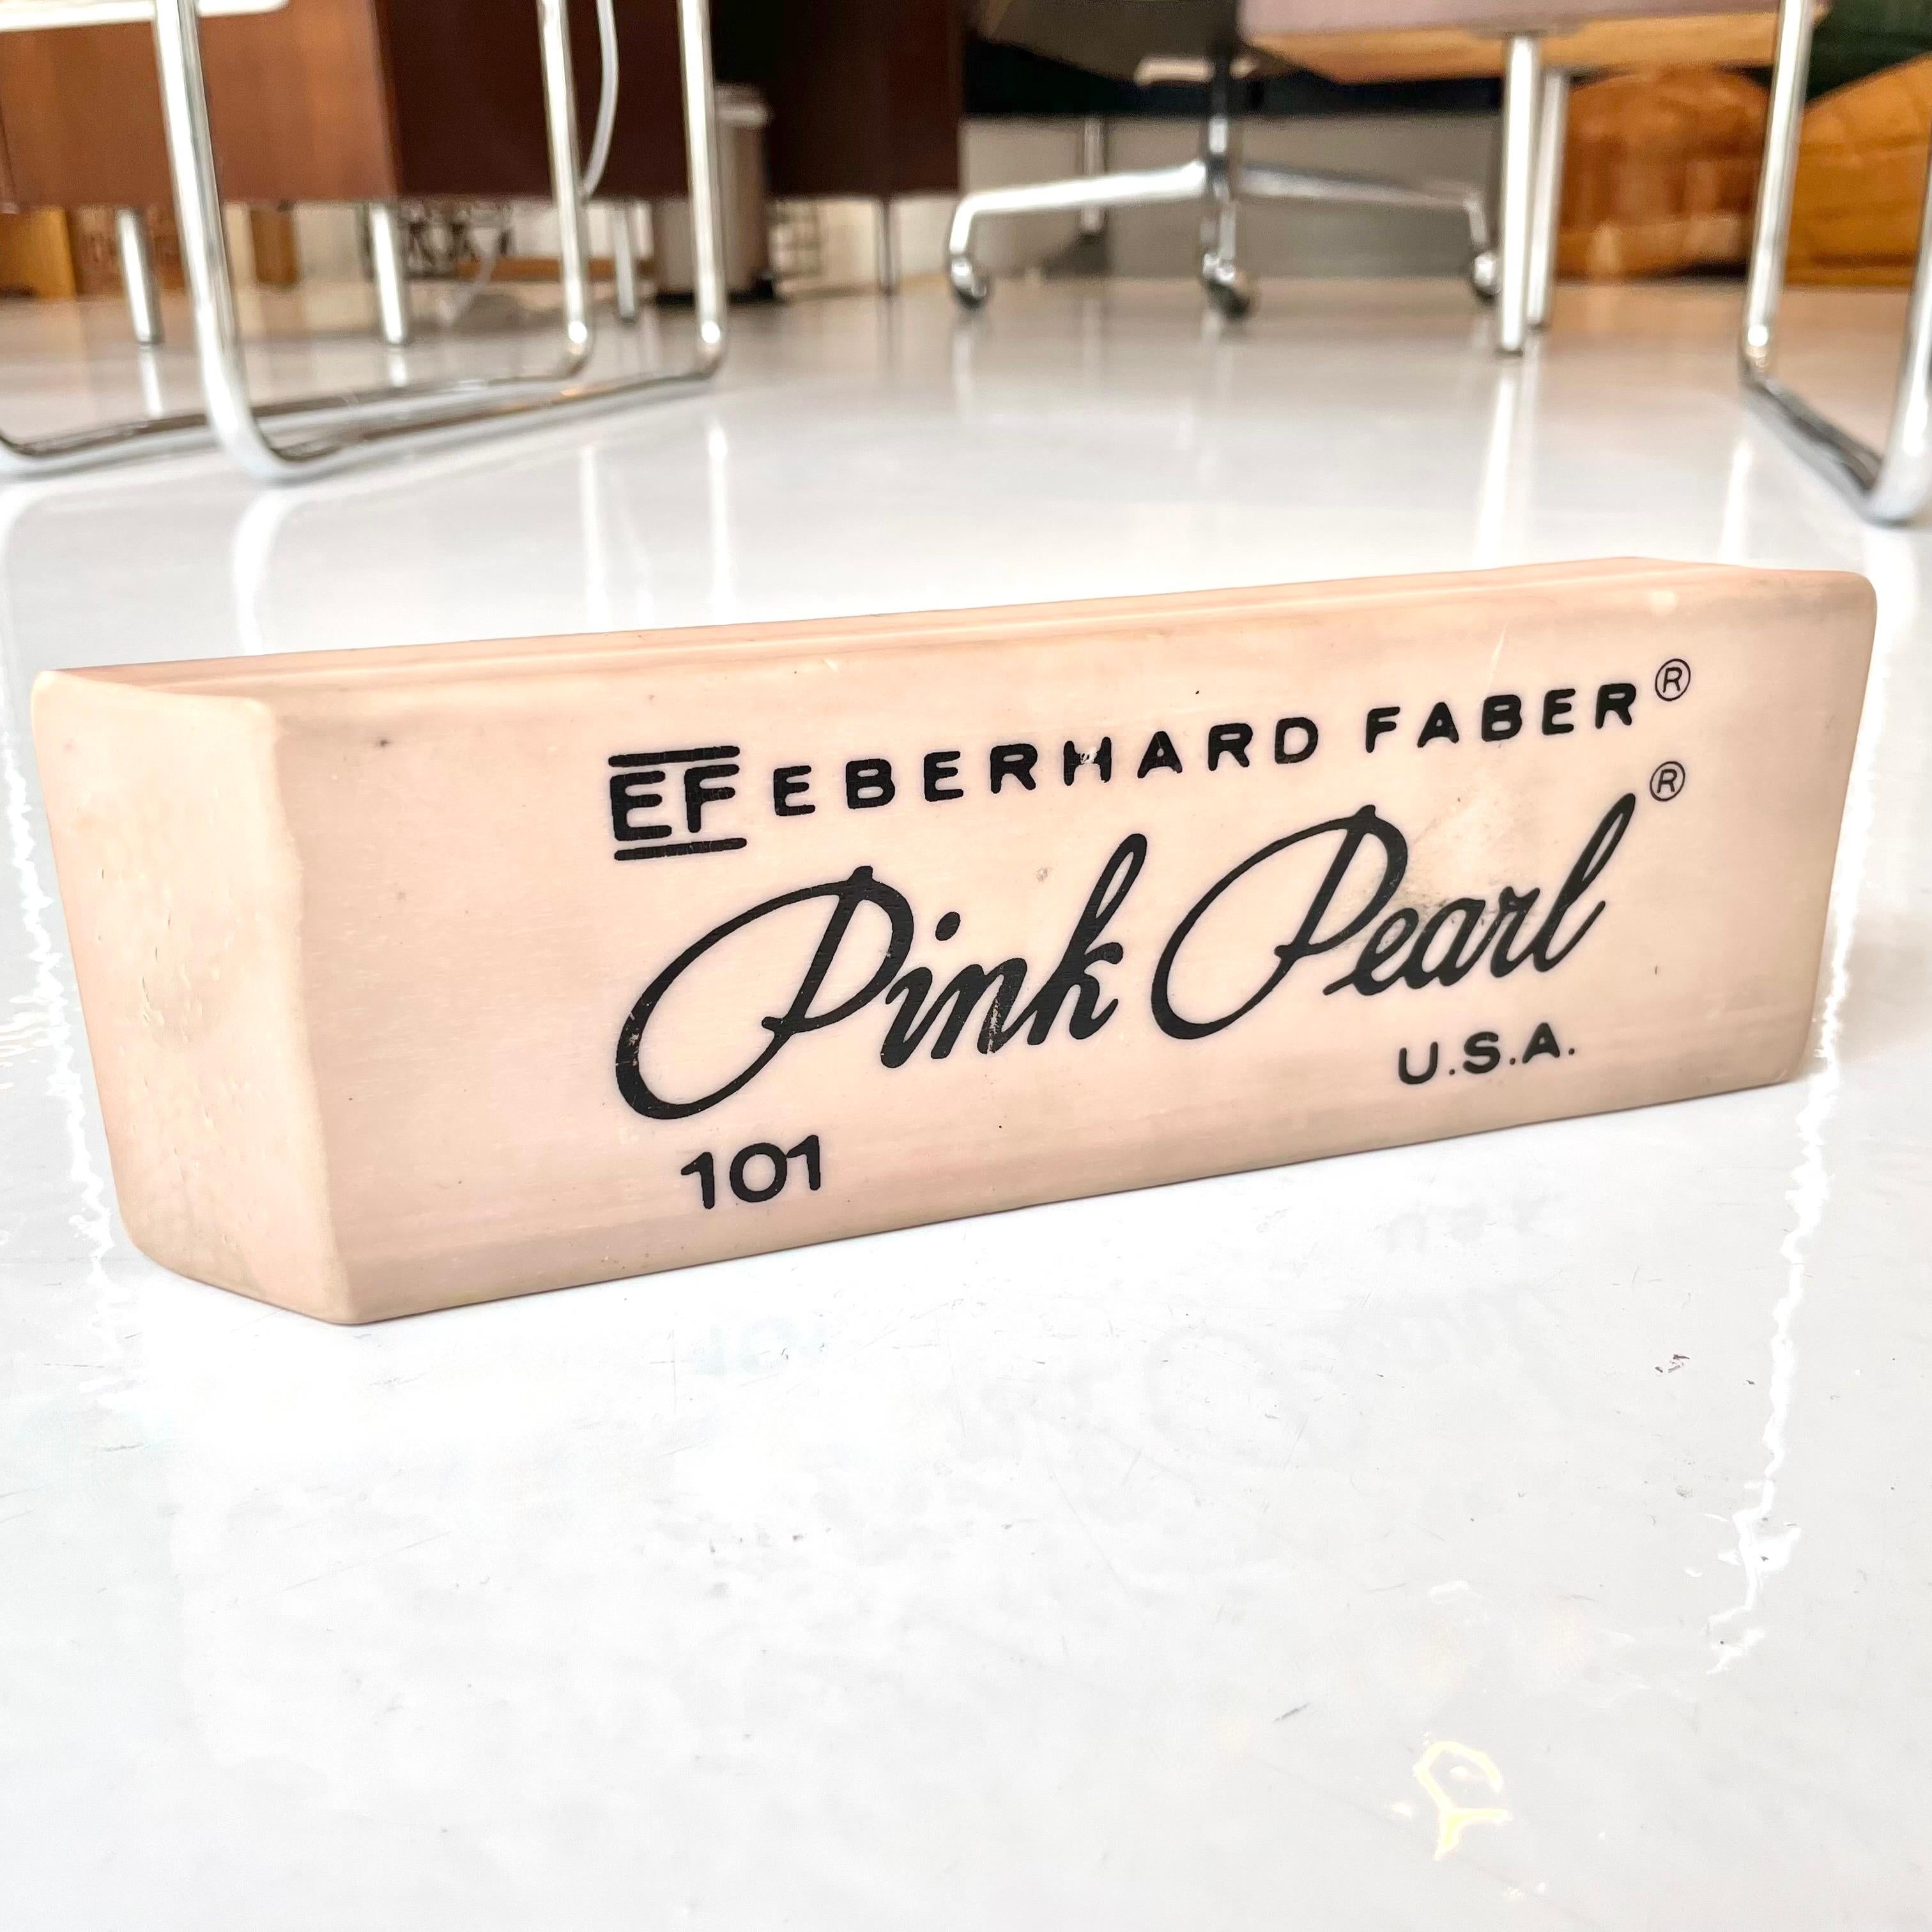 Giant vintage pink pearl eraser. Made in 1984 by Think Big, NYC. Made of an eraser rubber in a classic pink hue. With a ton of character, this sign makes a great desk object or paperweight. Great vintage condition. Super unusual piece of pop art.